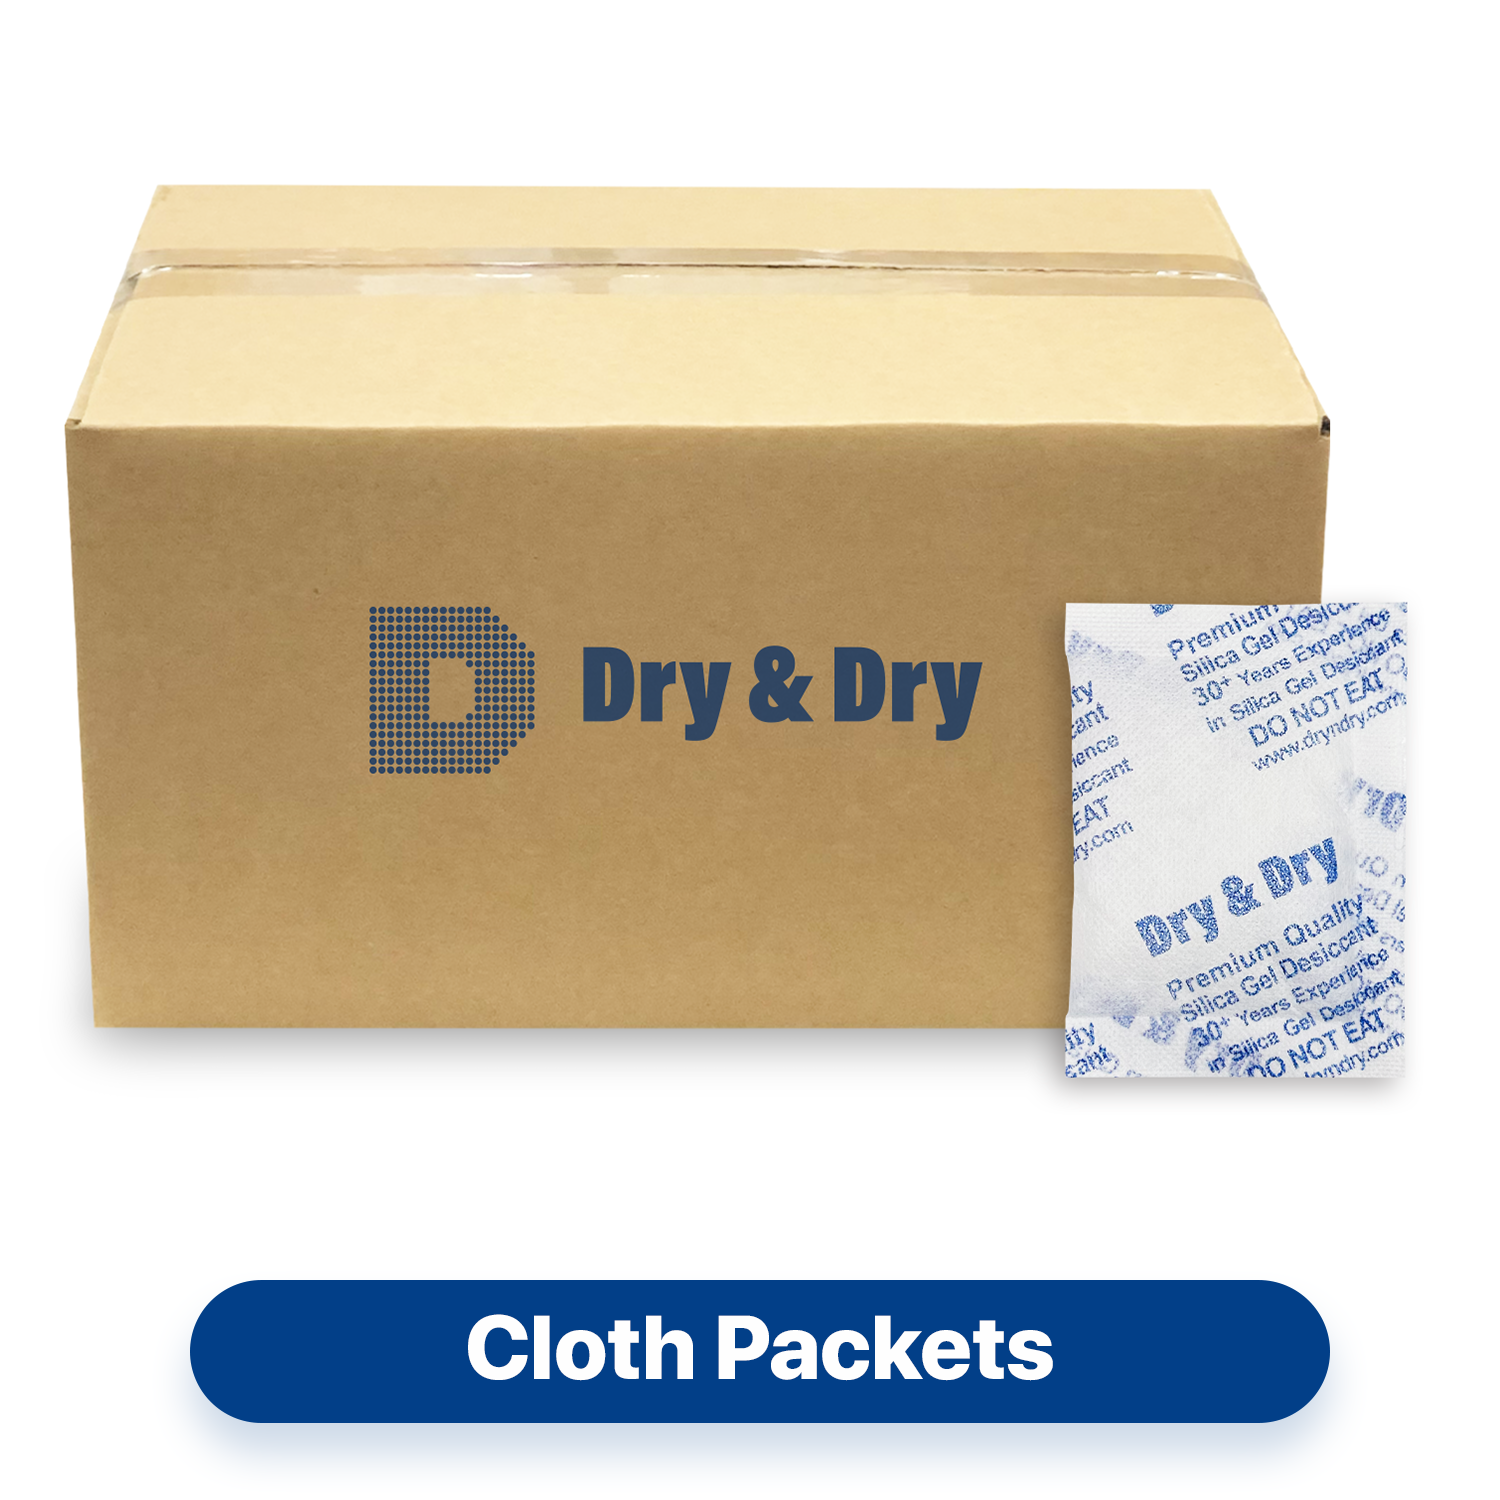 20 gram [800 Packets] "Dry & Dry" Premium Silica Gel Desiccant Packets - Rechargeable Fabric